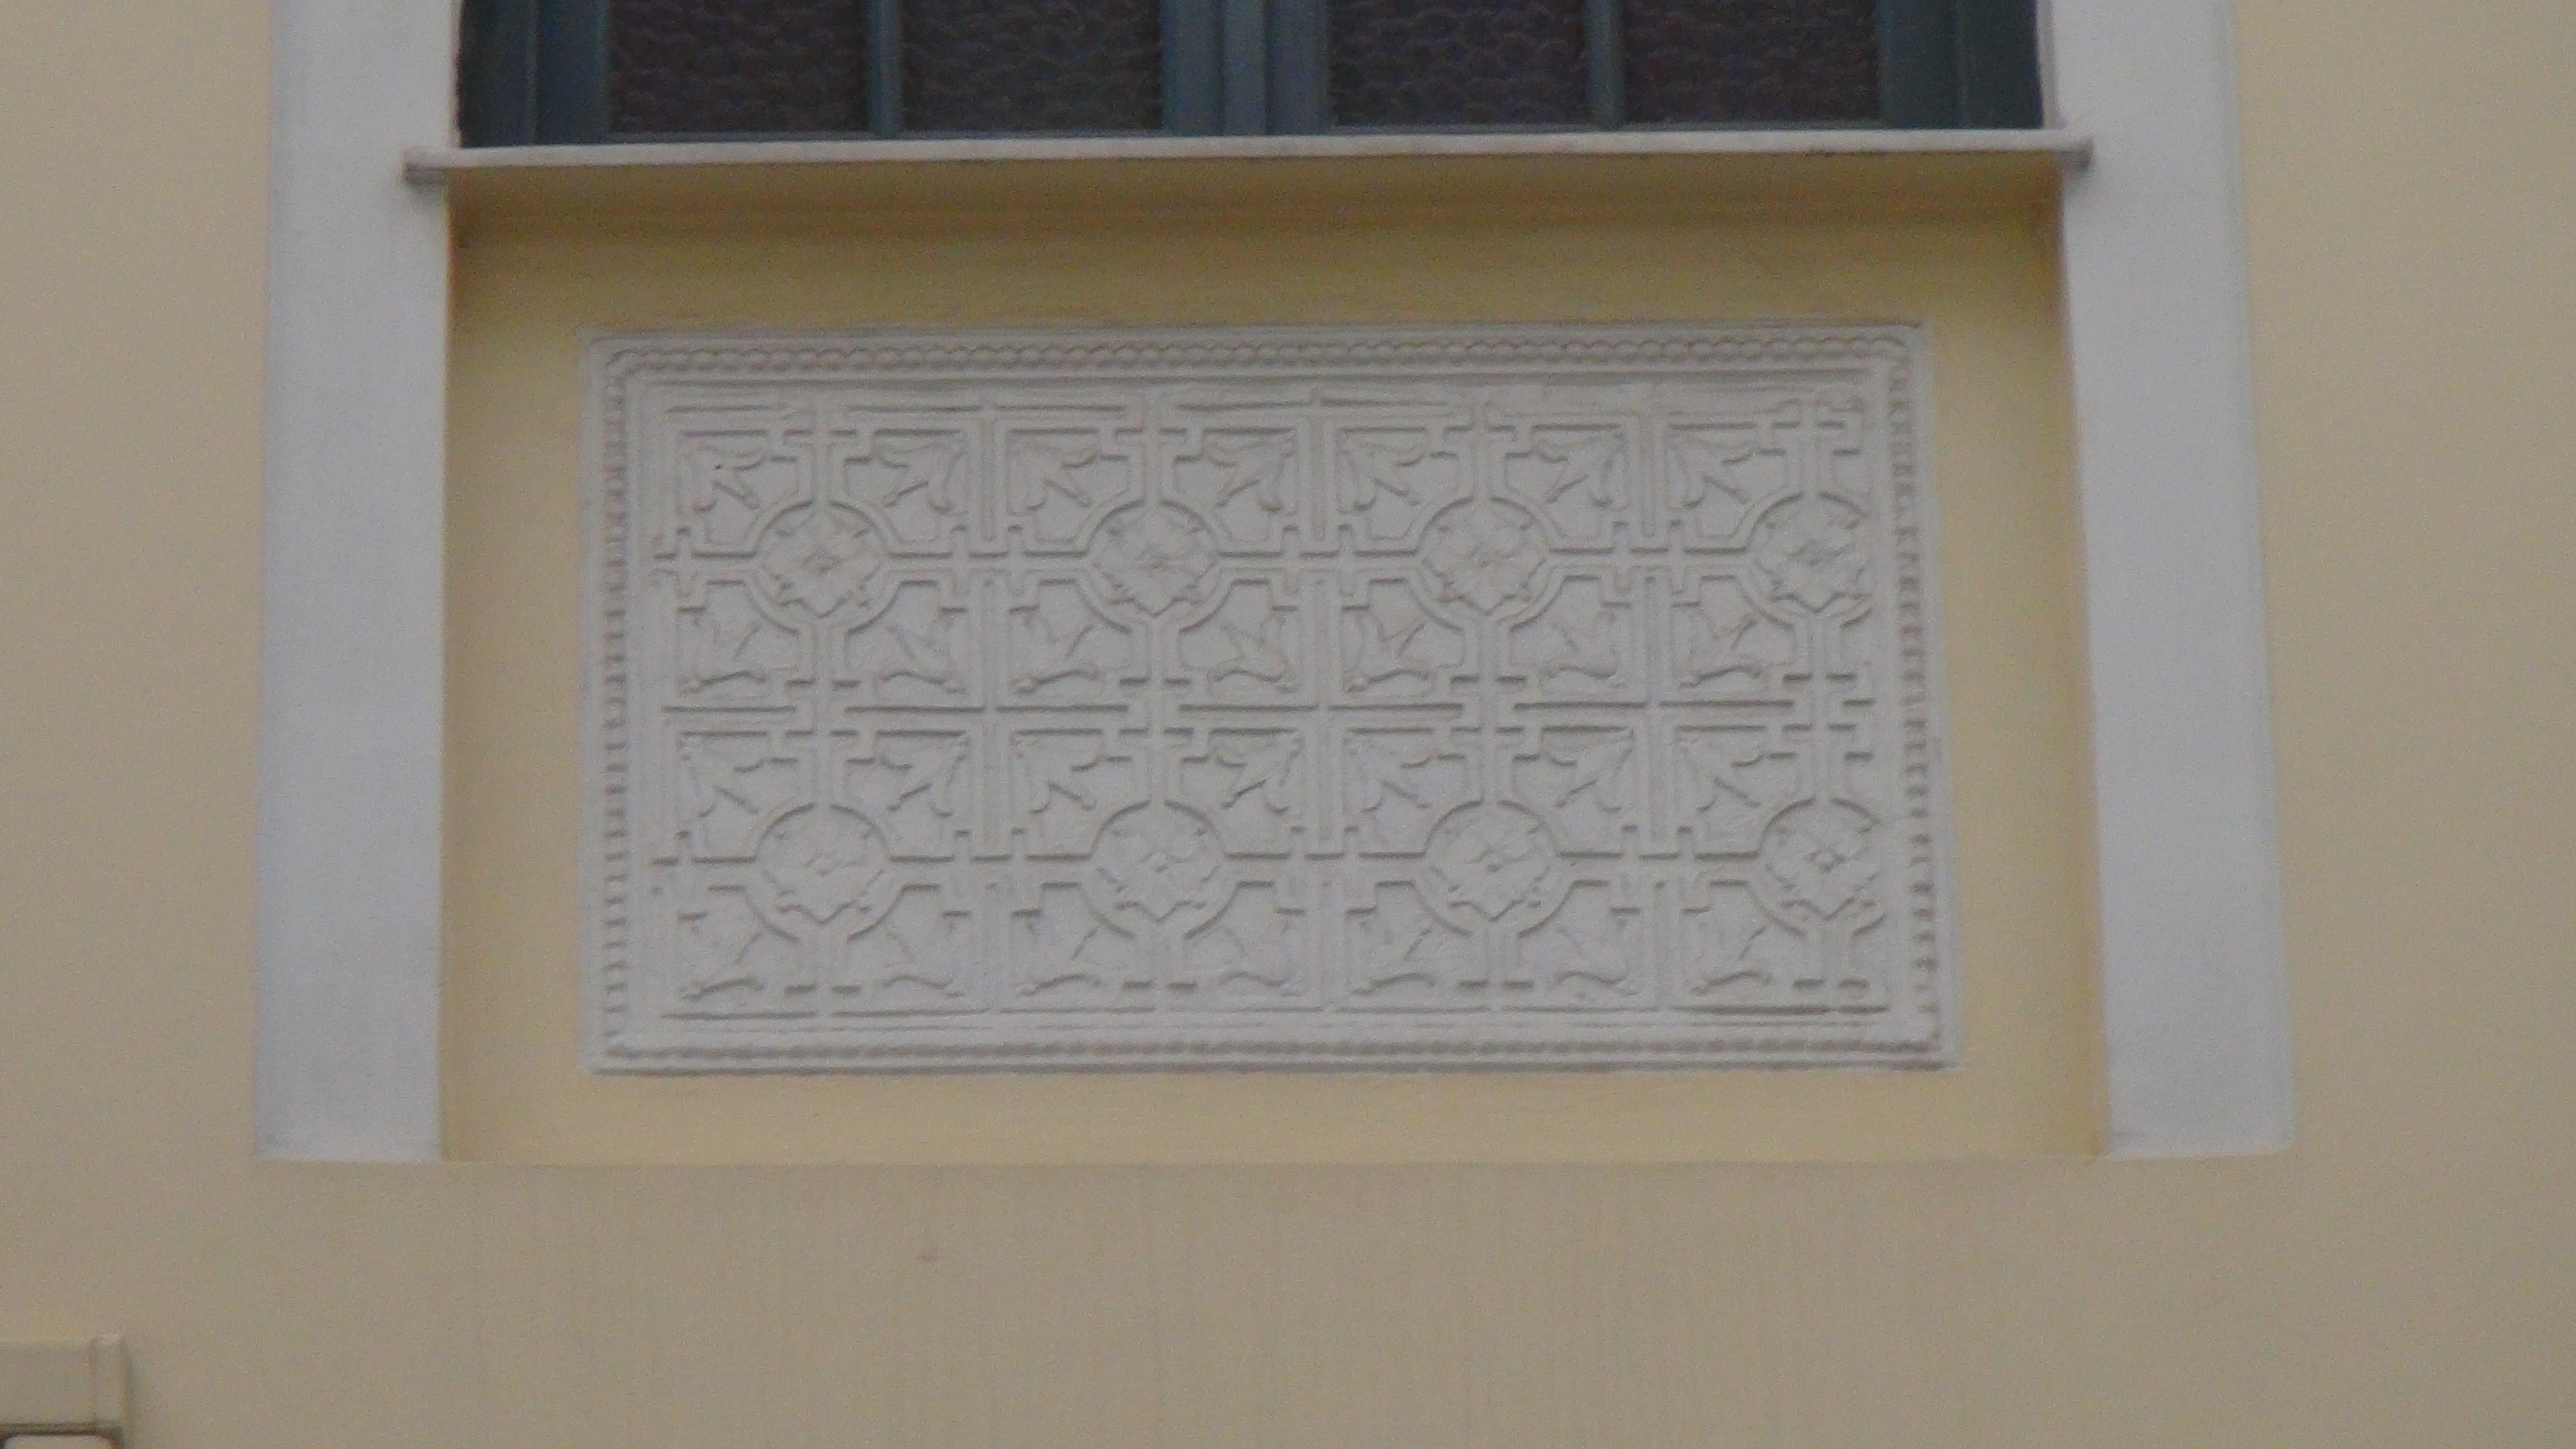 Decorative engraved plaque under the window of the upper floor at the side of the building